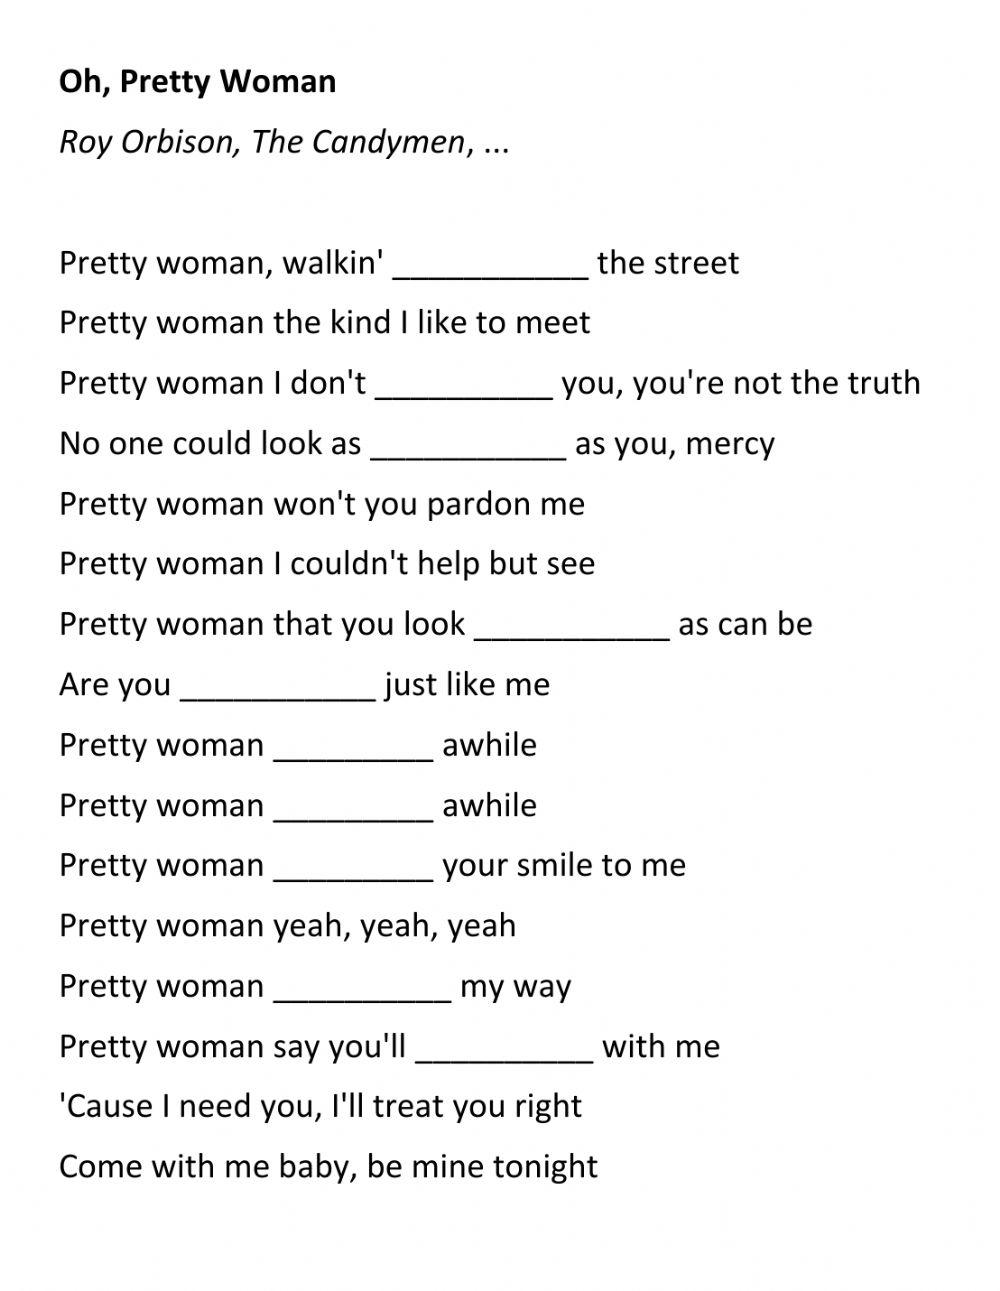 Pretty Woman song fill in gaps